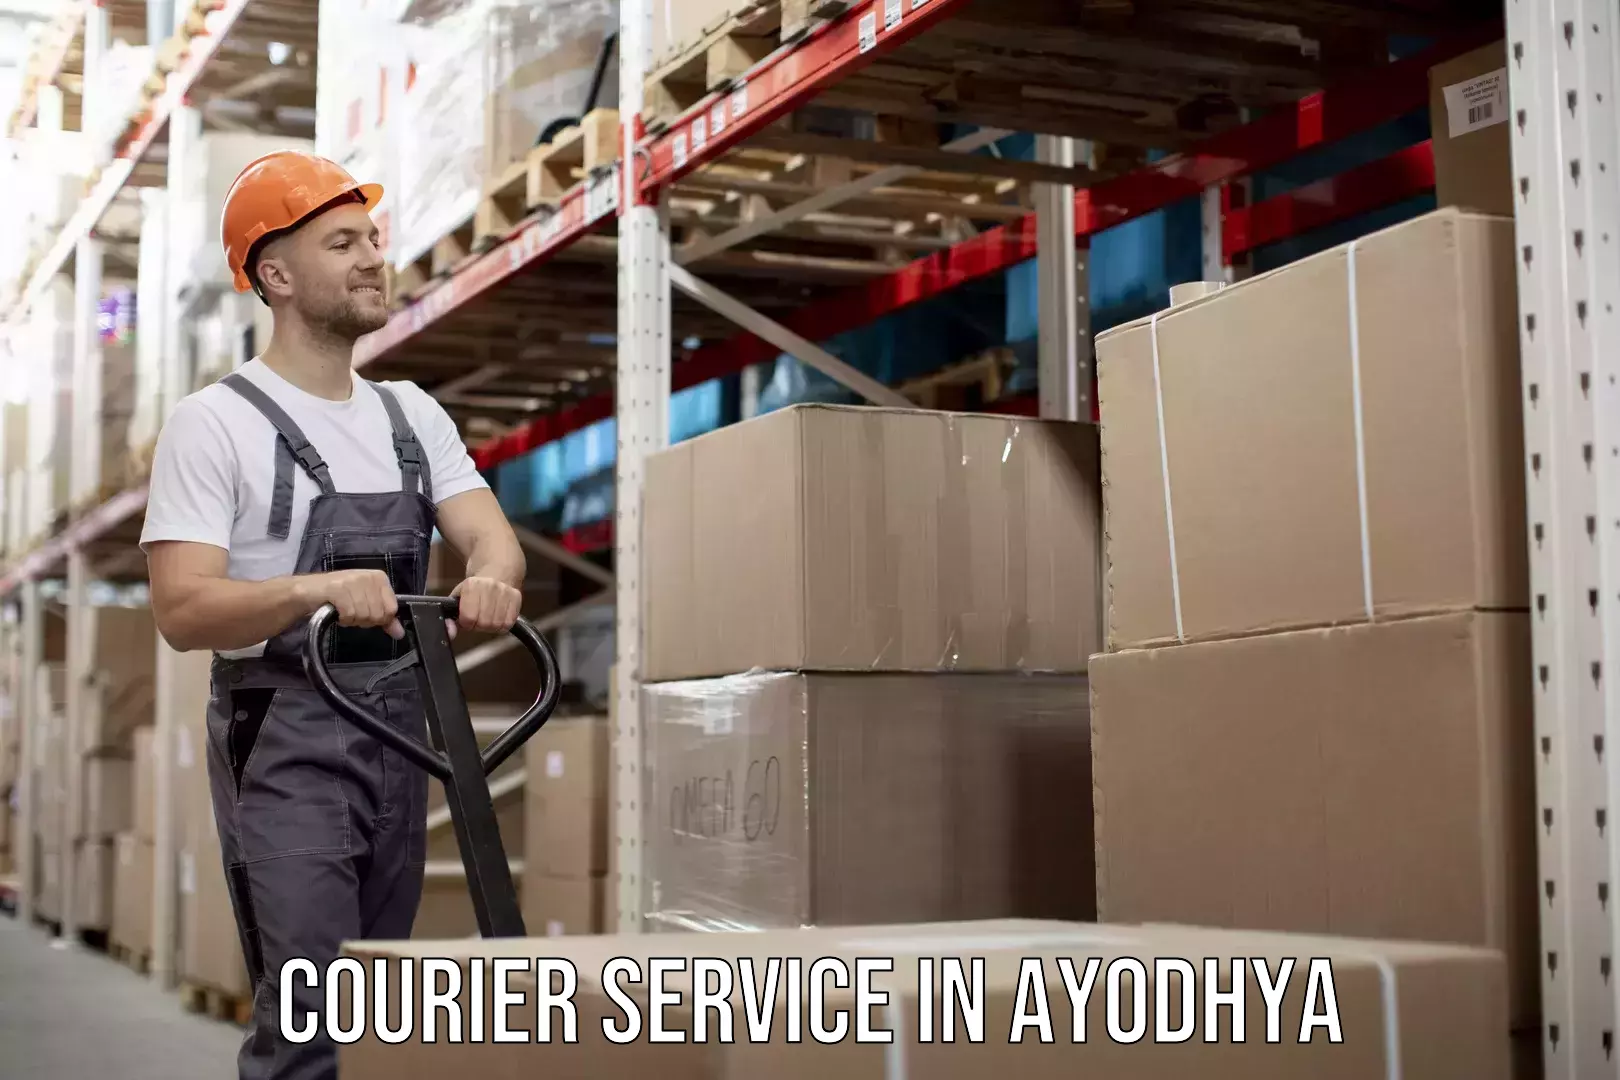 Express delivery capabilities in Ayodhya